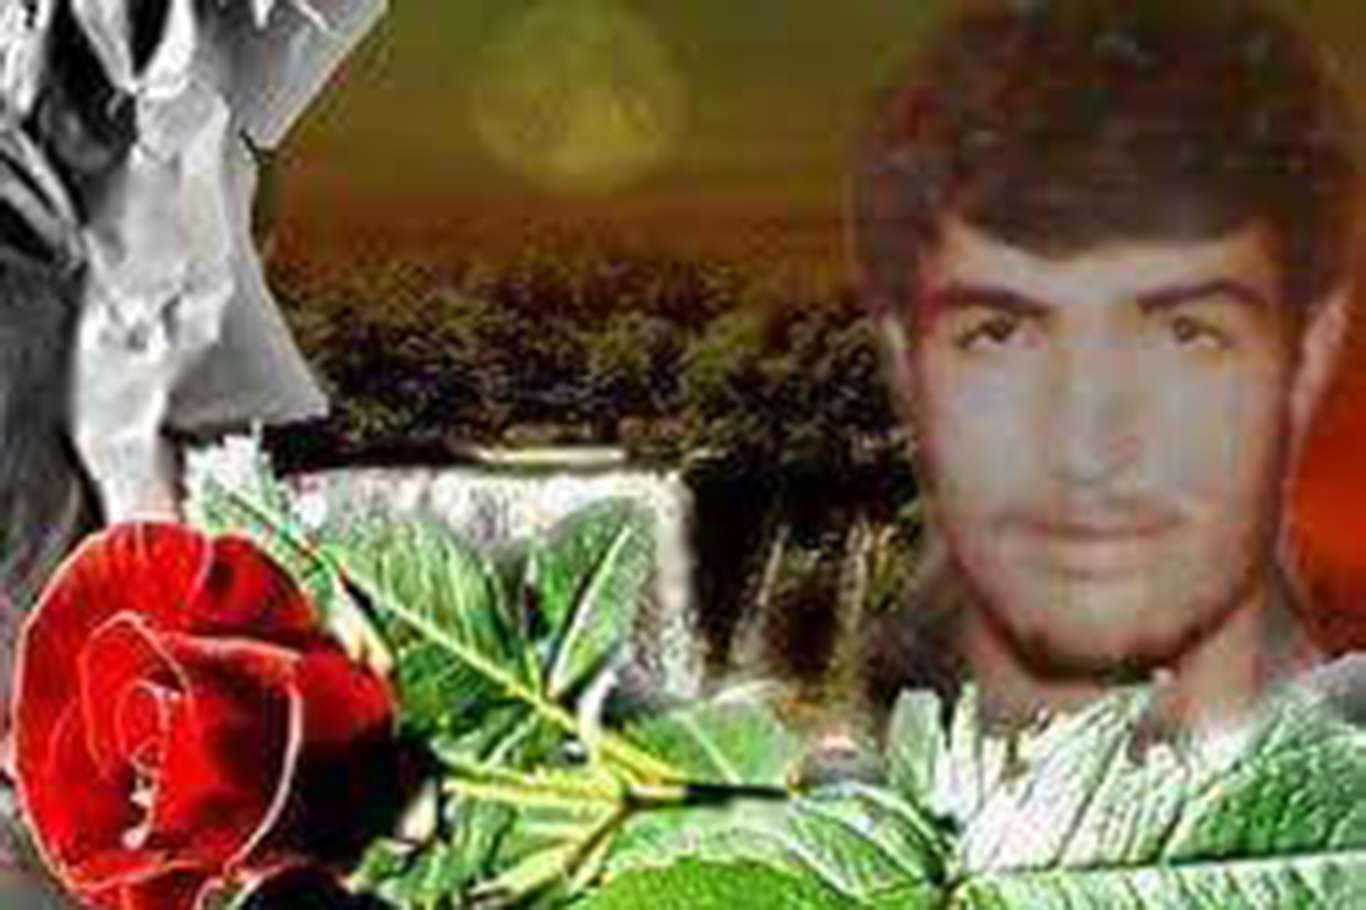 The action and mission of Martyr Muhammed Ata Zengin